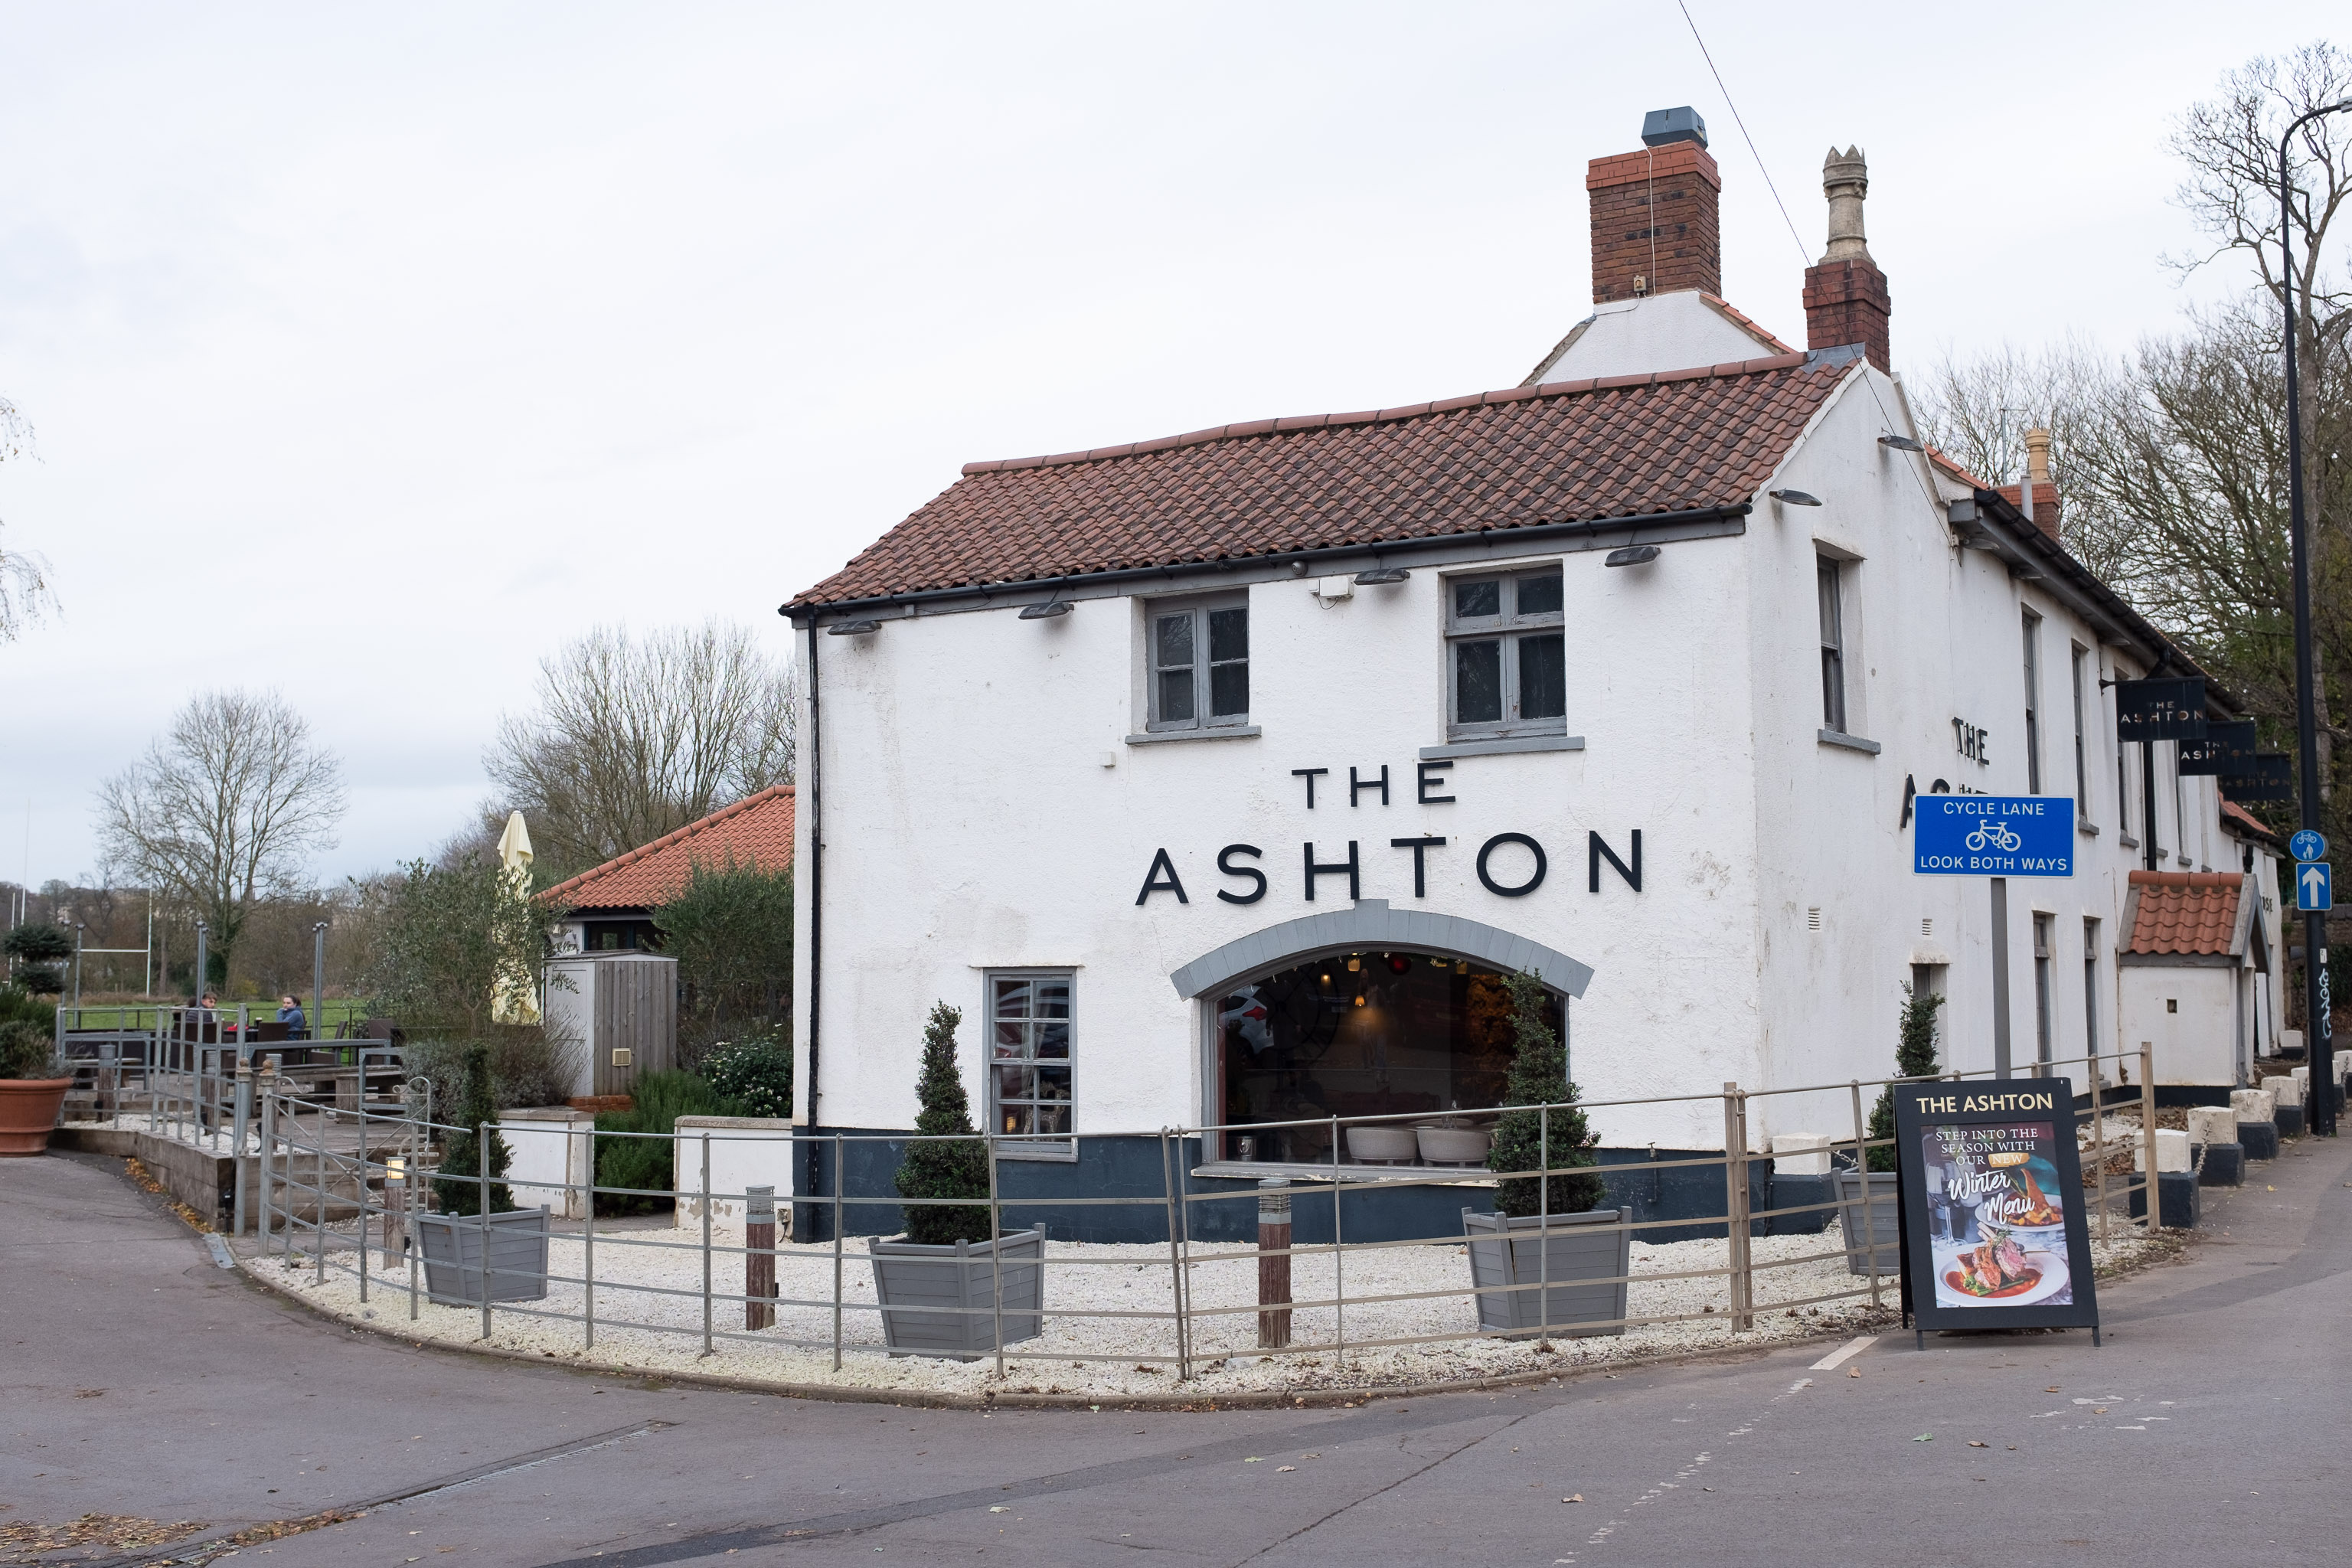 The Ashton End View
It's got the grazing field at the front and school playing fields at the back, and the road it's on isn't manic. Does this count as a Somerset "cou...